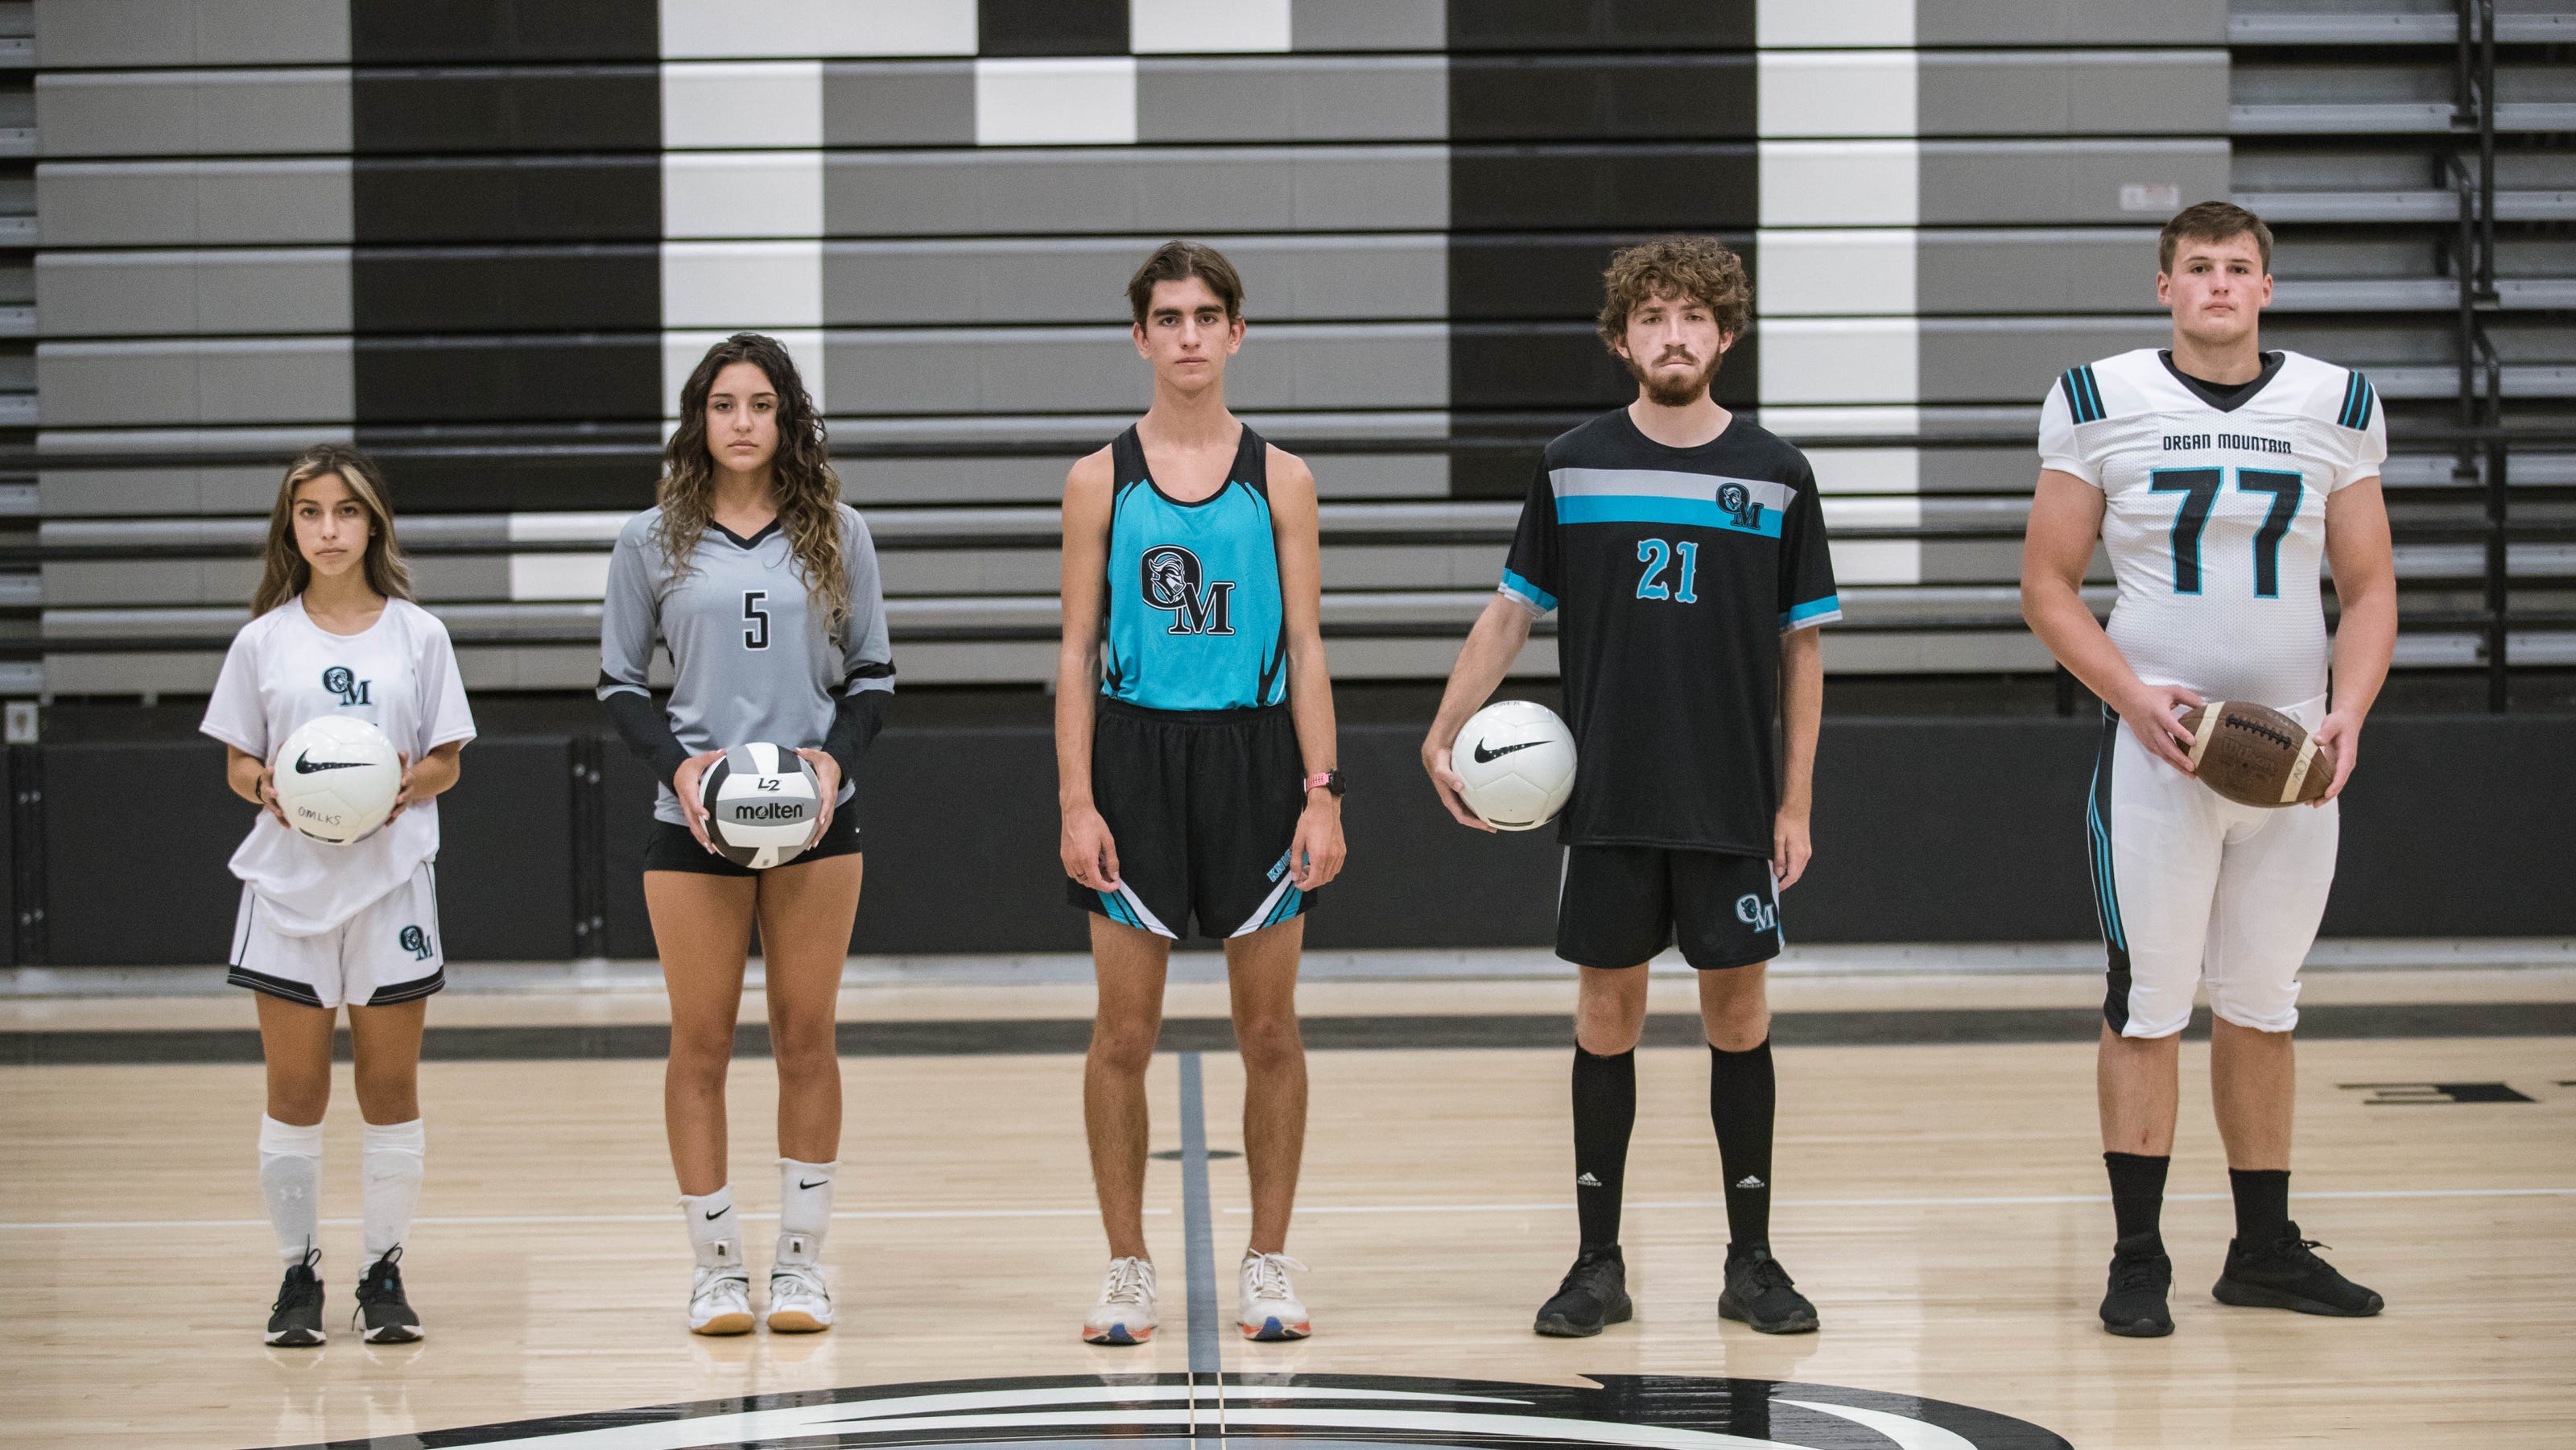 Organ Mountain High School unveils fall sports uniforms after name change